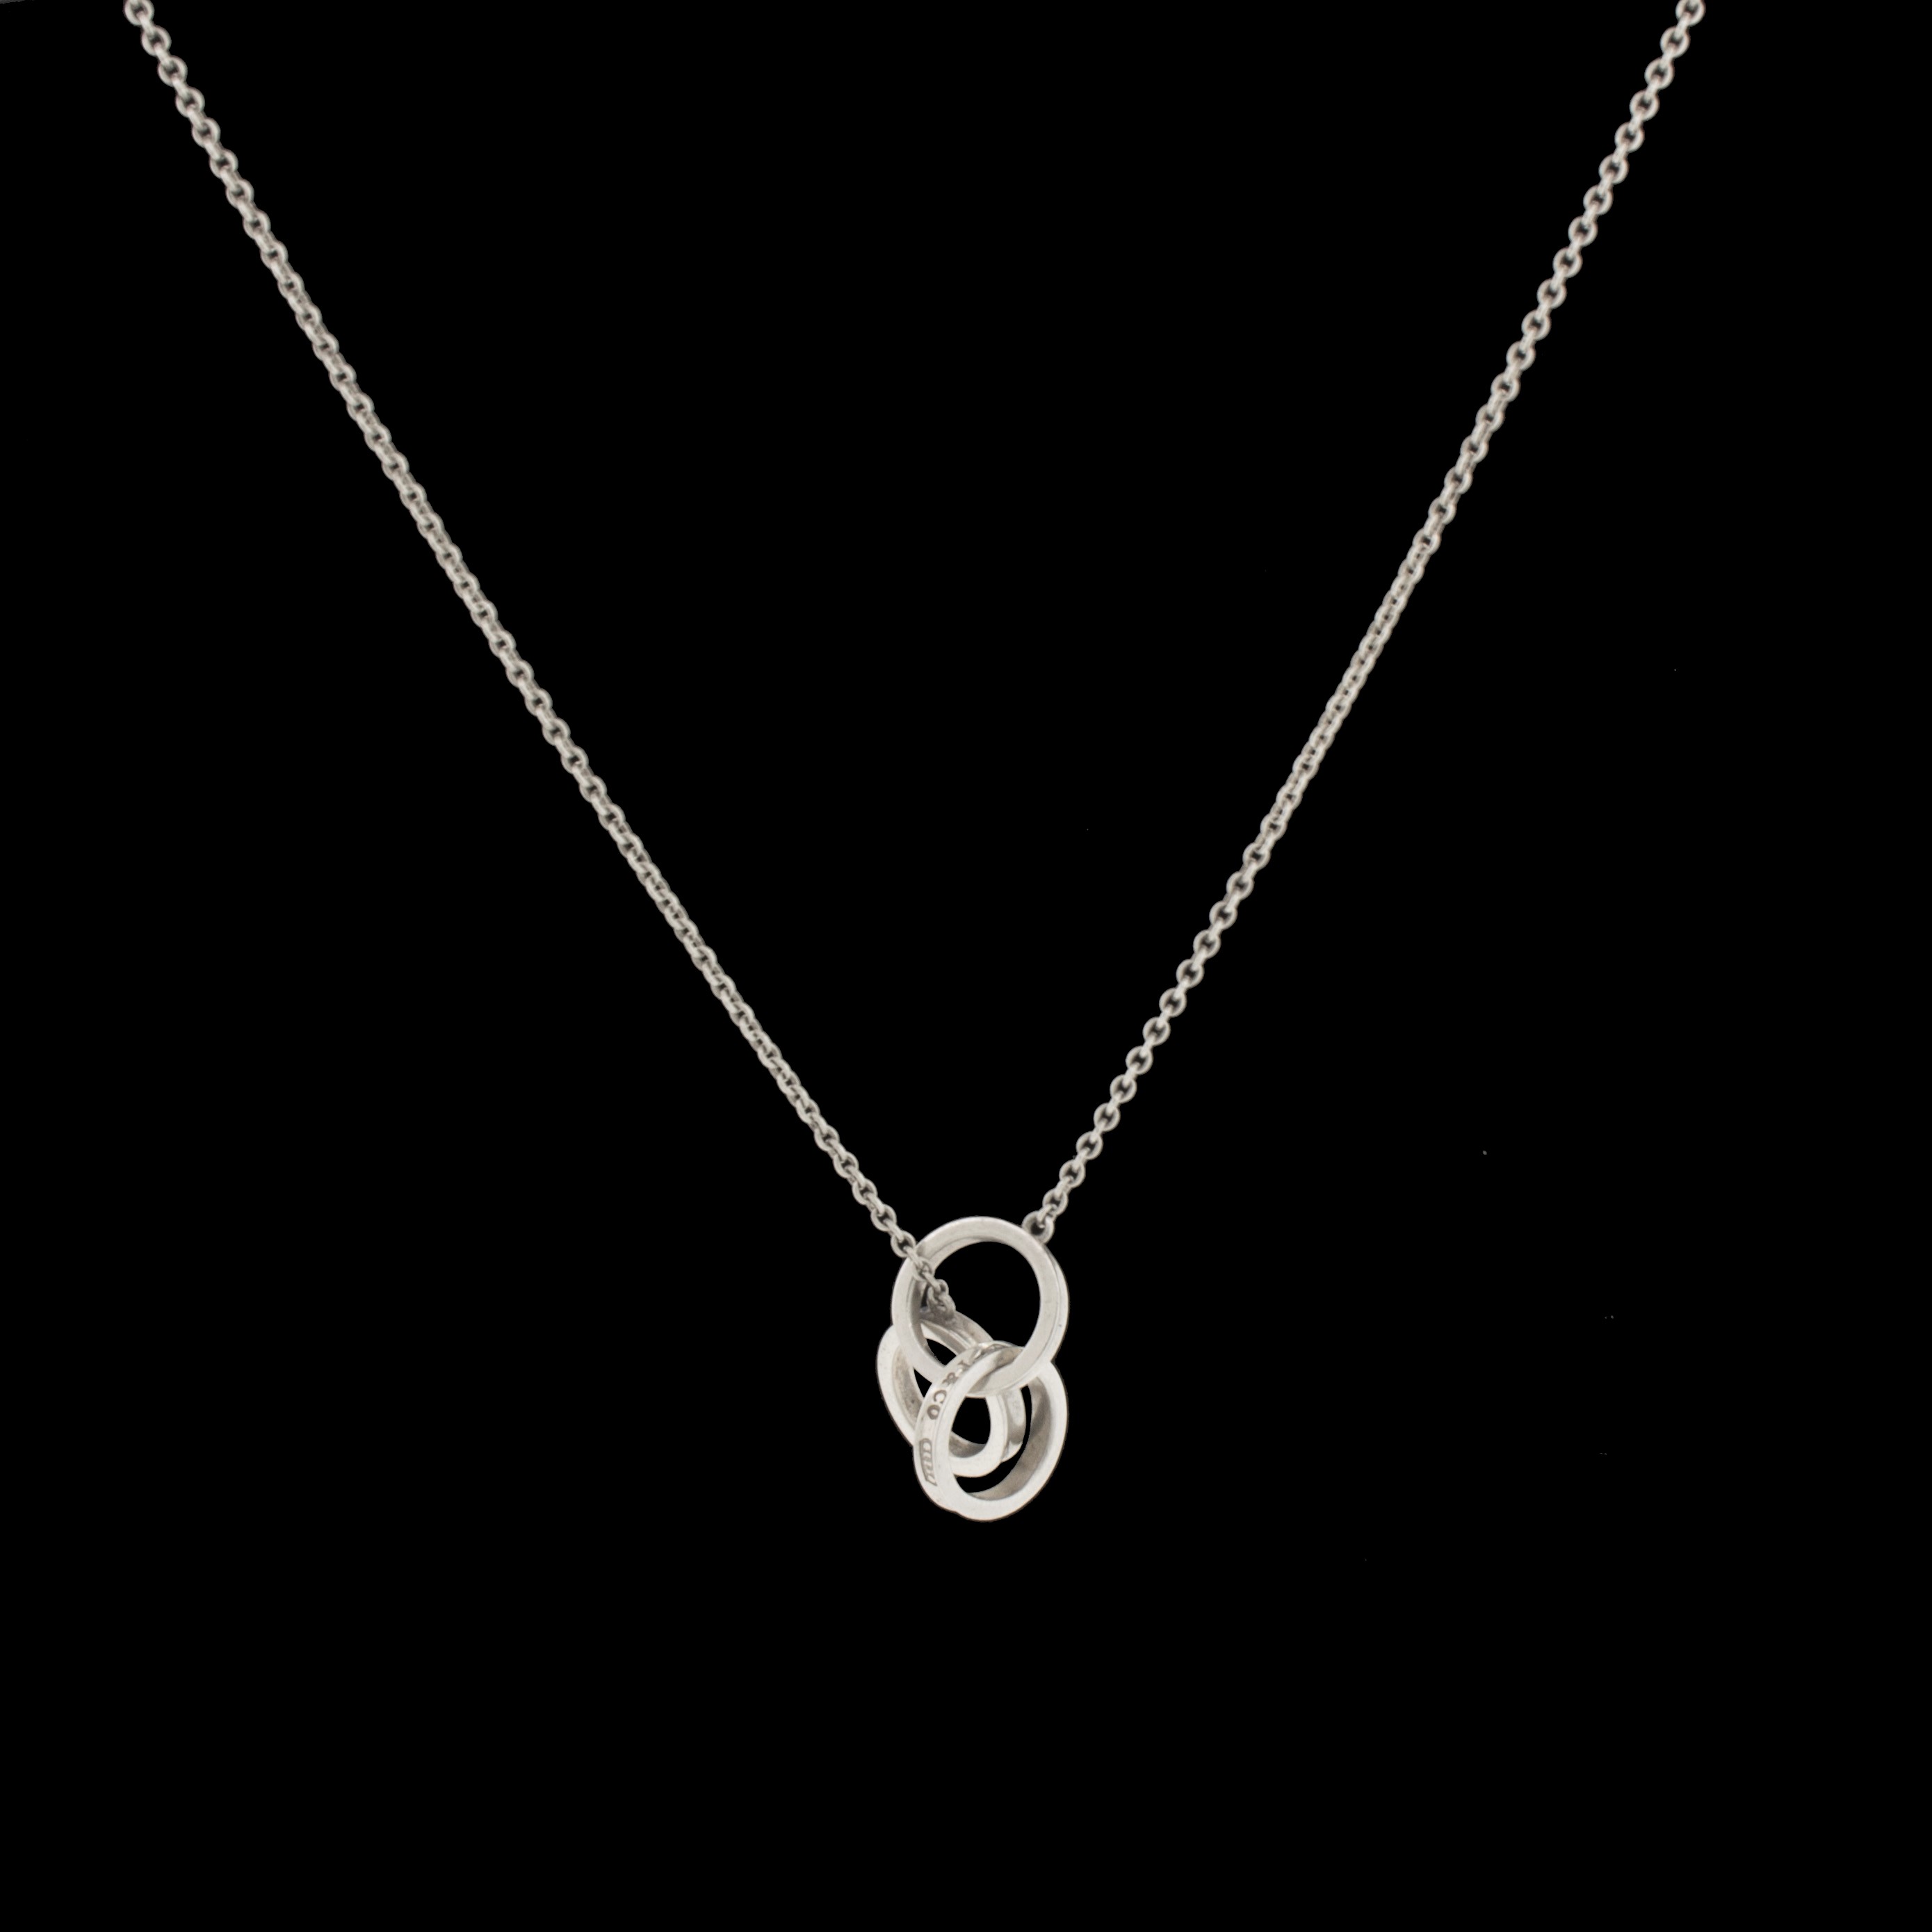 Tiffany & Co Sterling Silver 925 3 Ring Circle Love Necklace 1837